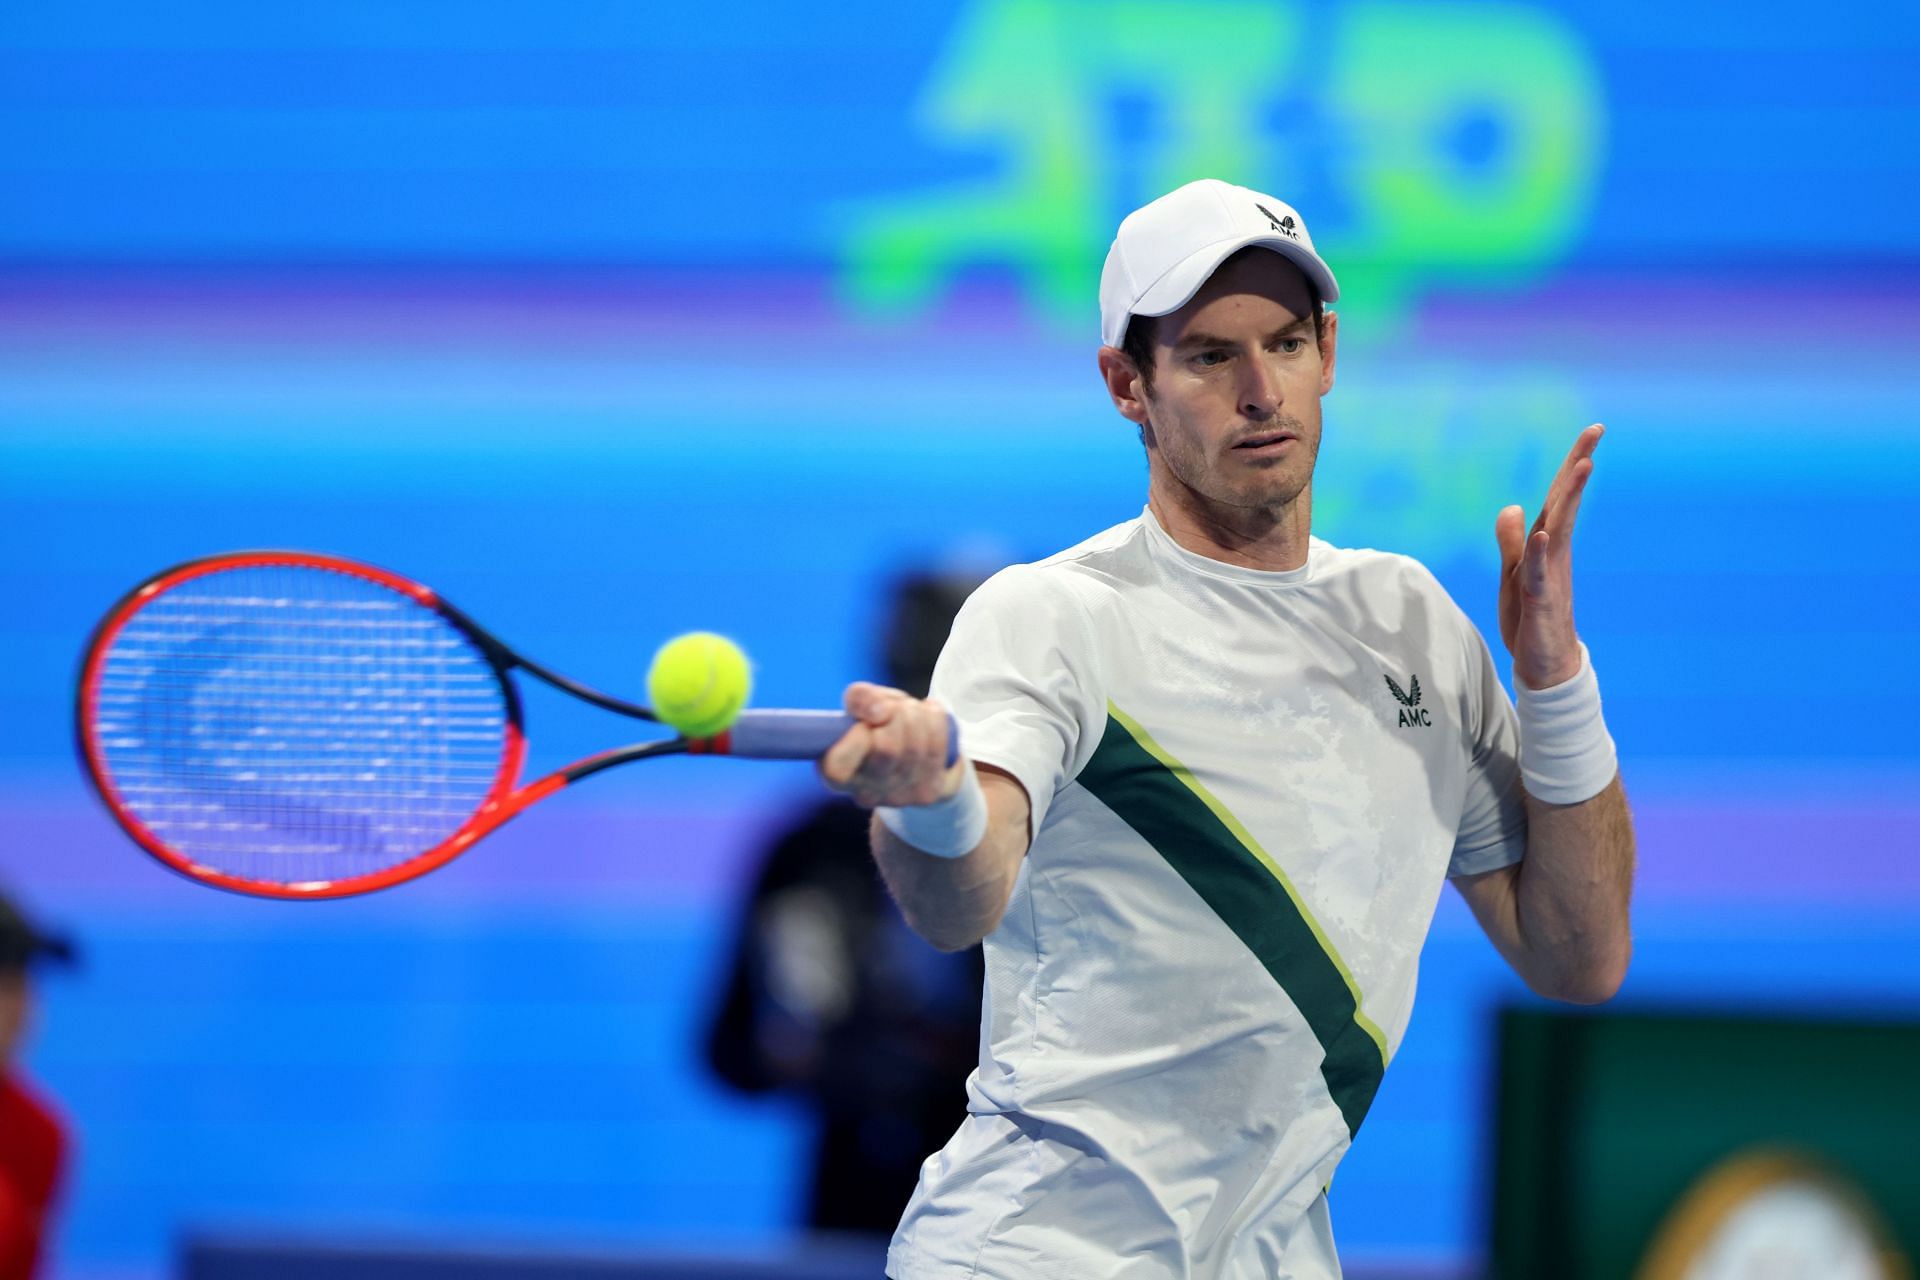 Andy Murray in action at the Qatar Open